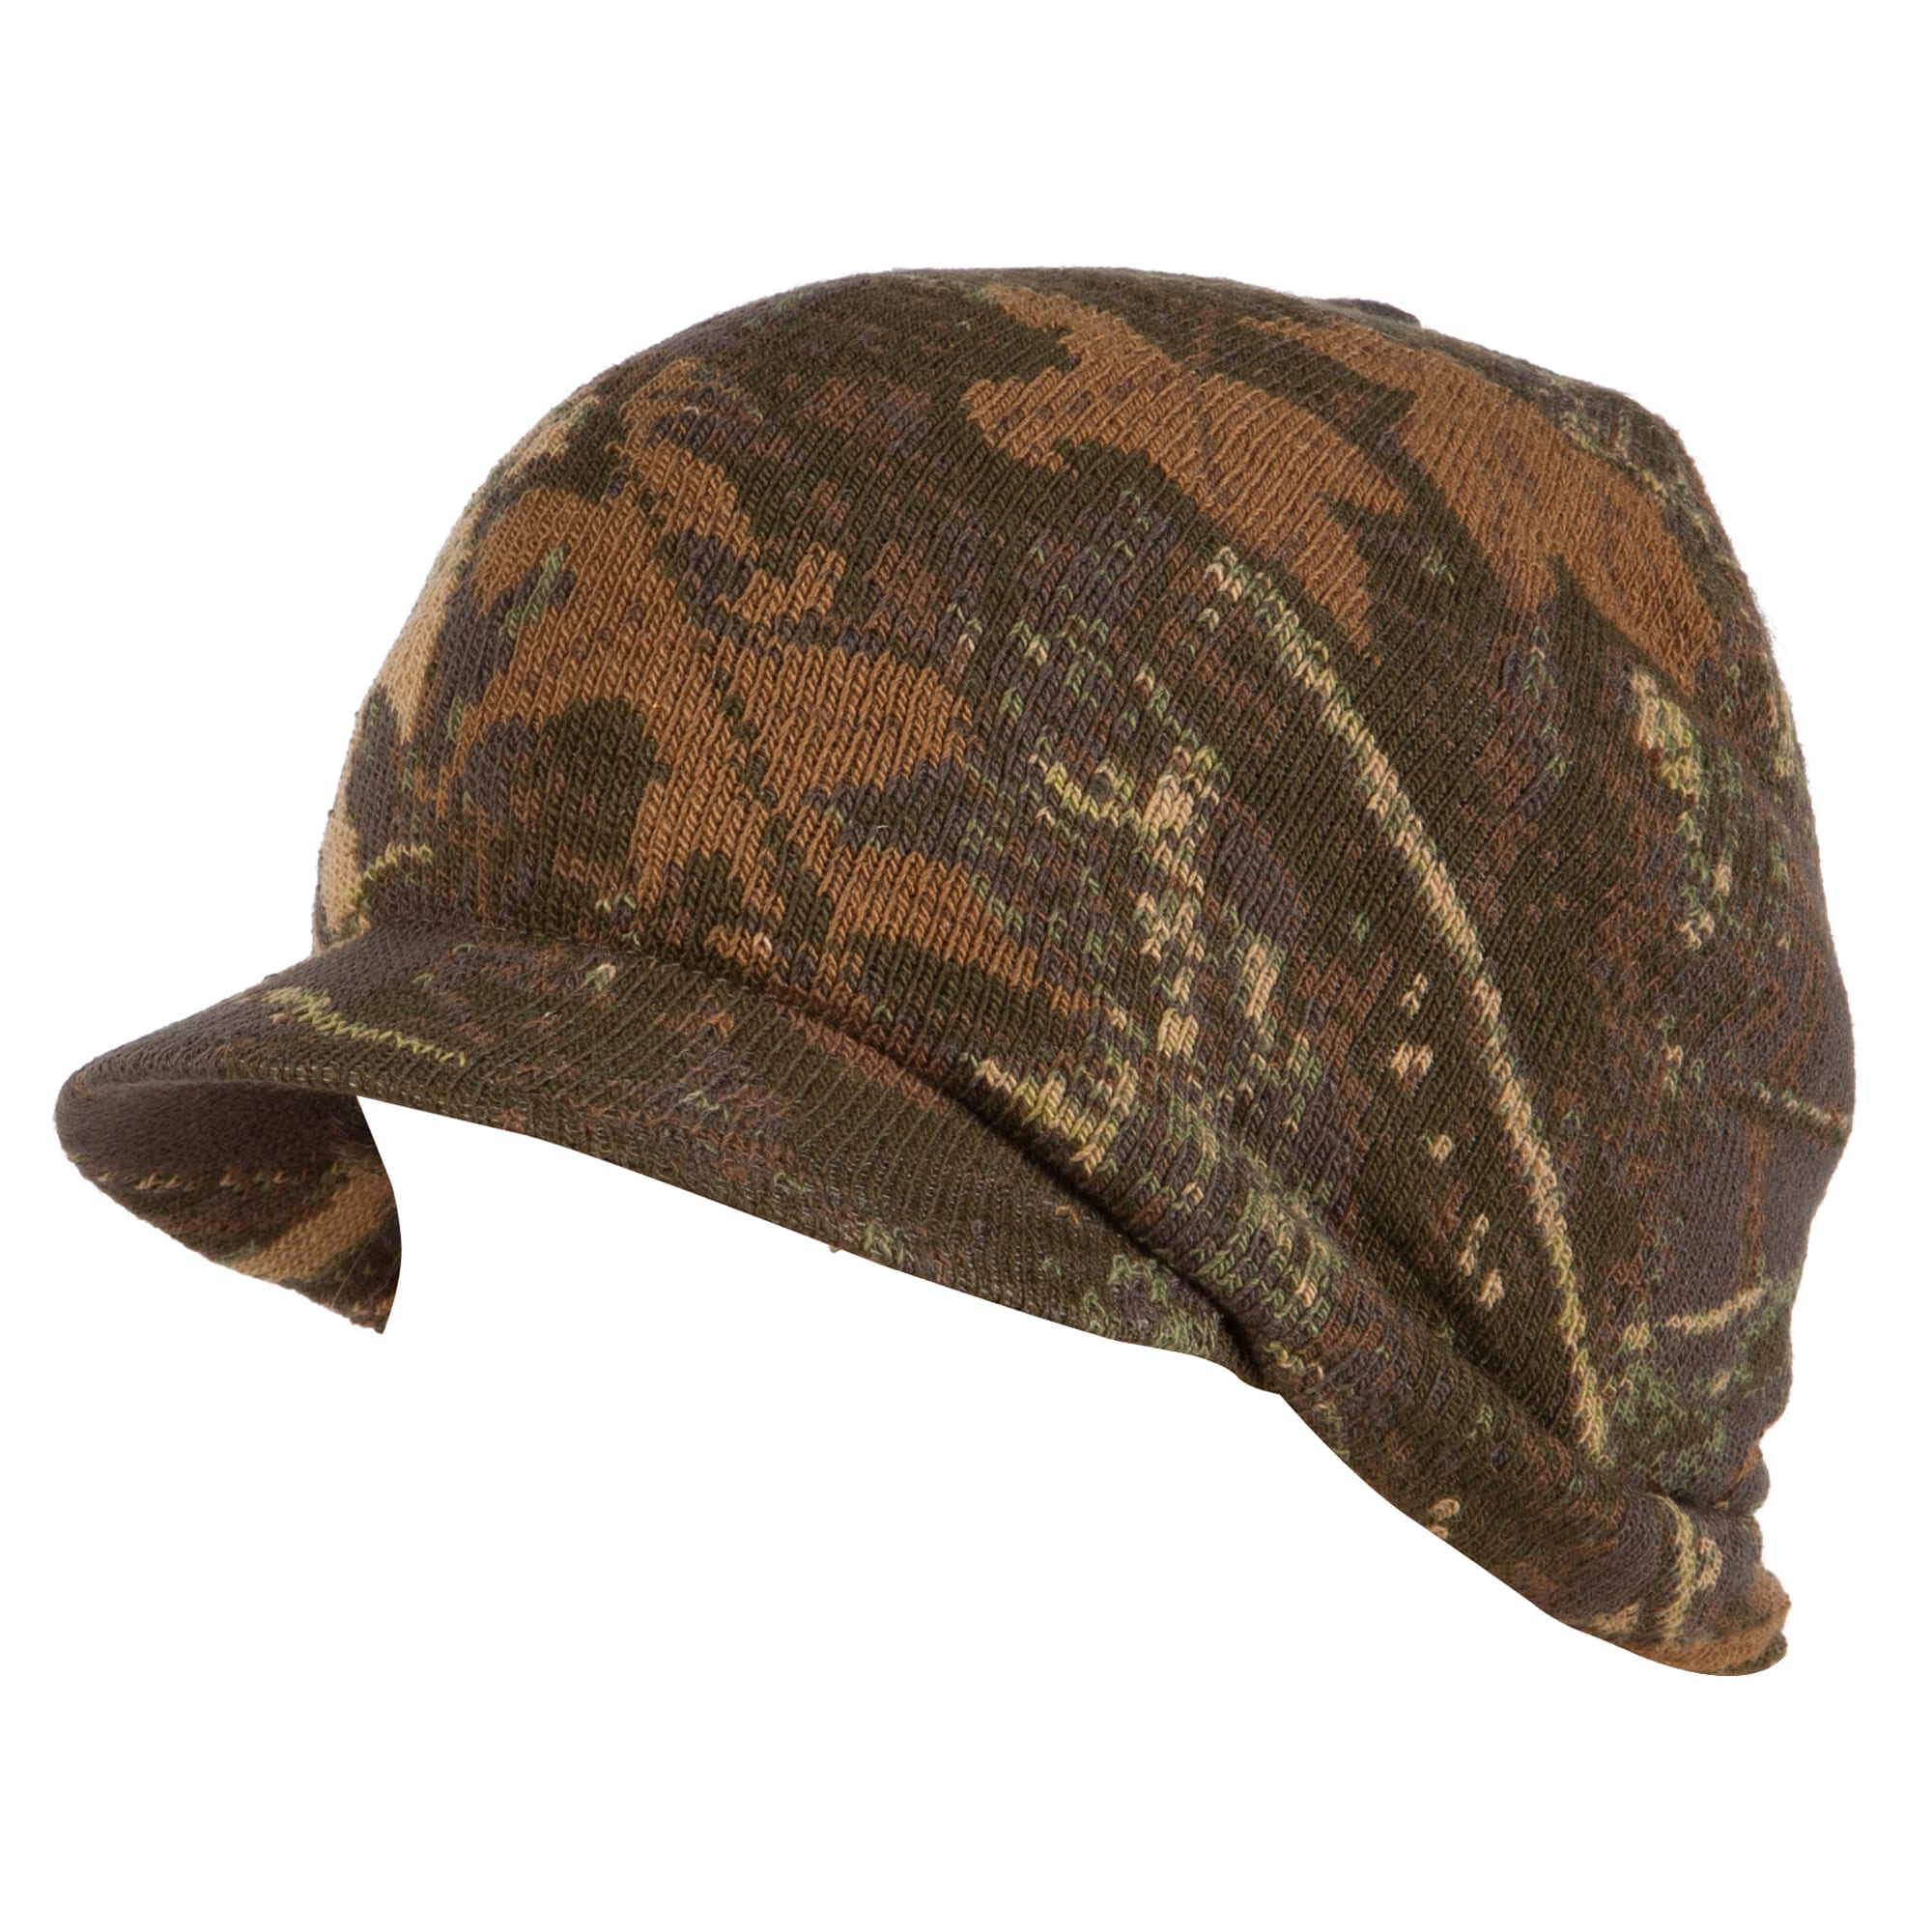 Quietwear Digital Knit Camo Visor Cap (Adventure brown Ultra Fresh treatment, which helps control the wearers own scentOne size fits mostDimensions 7.75 inches long x 10 inches wideWeight 0.5 poundsCare instructions Hand wash cold with like colorsModel